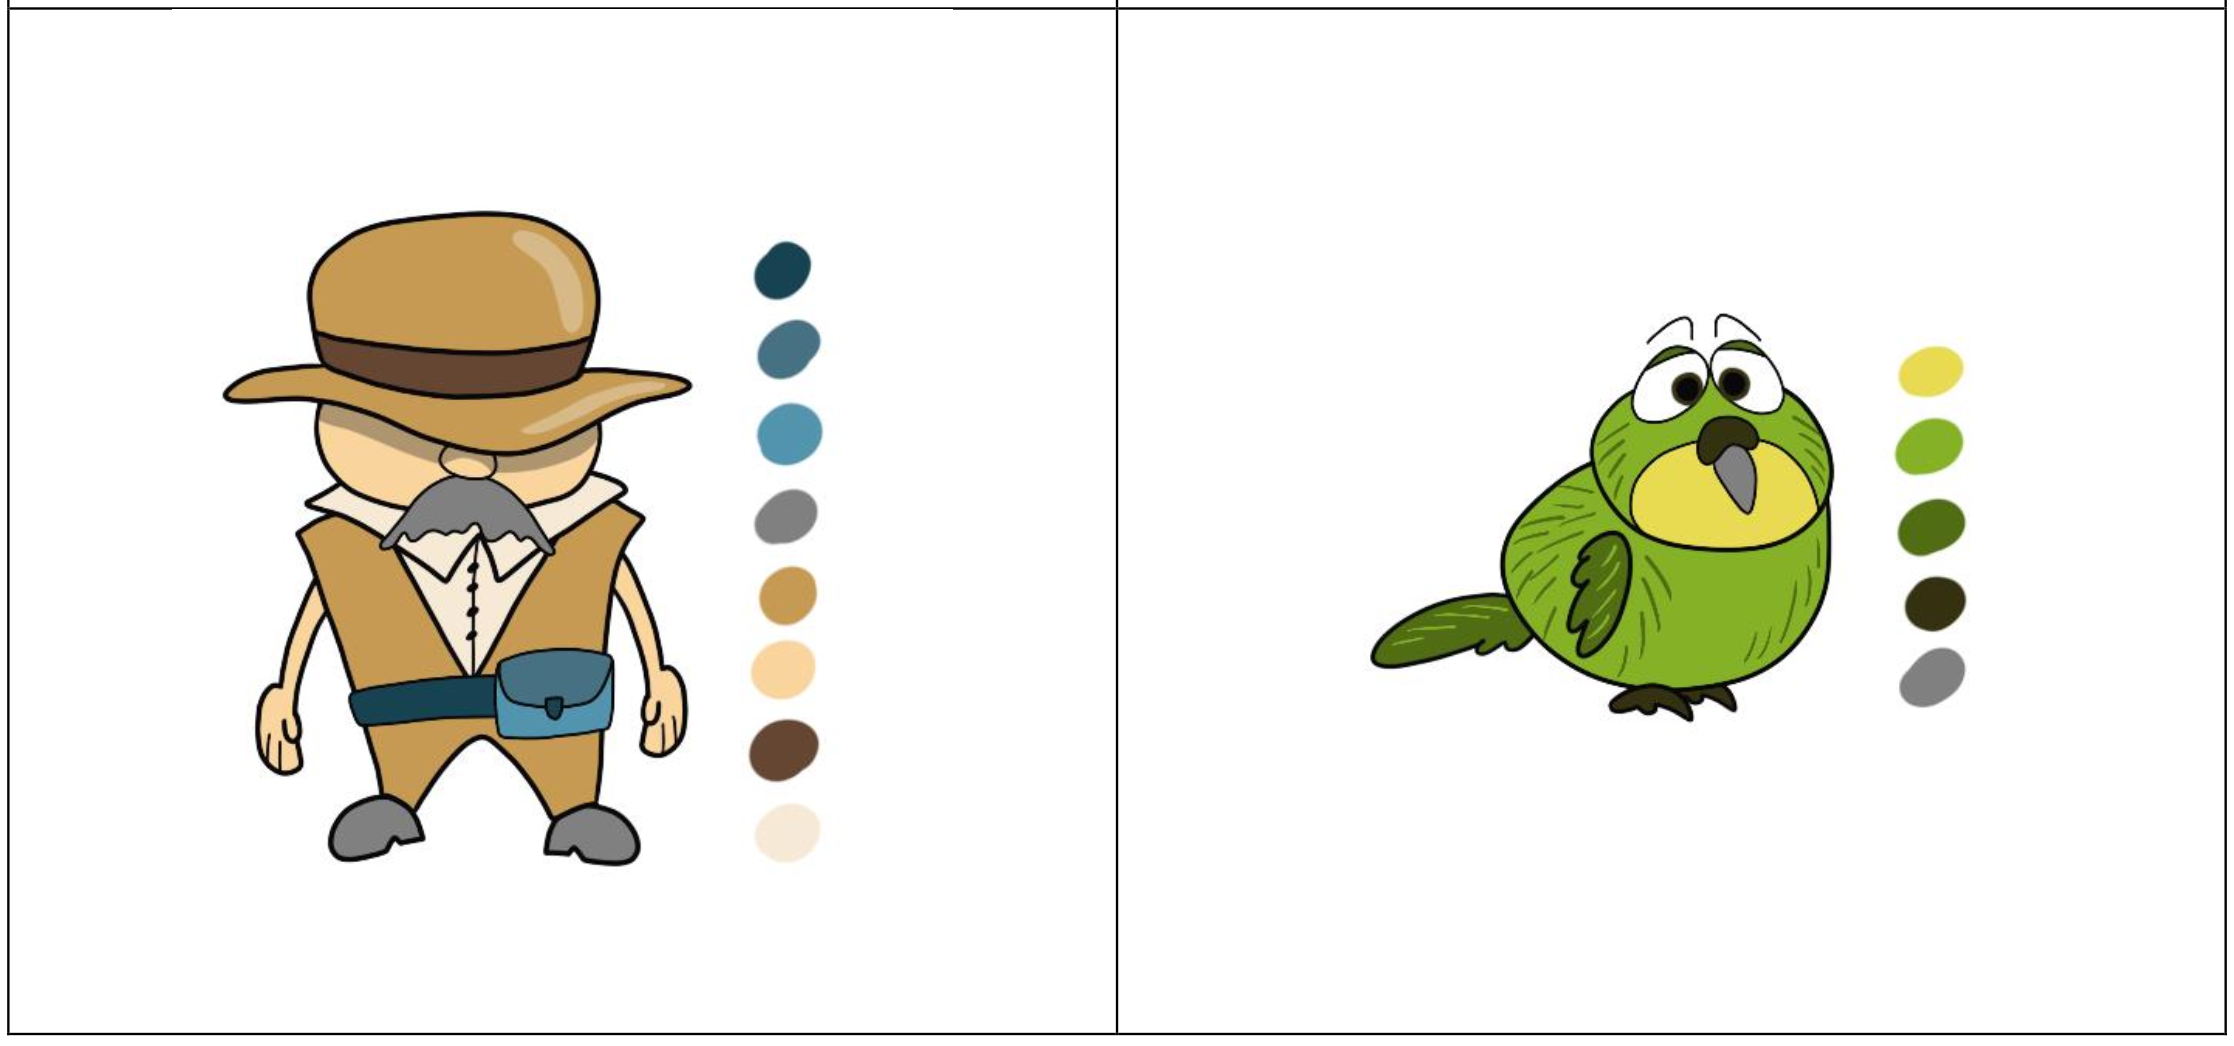 Character designs created in Adobe Illustrator